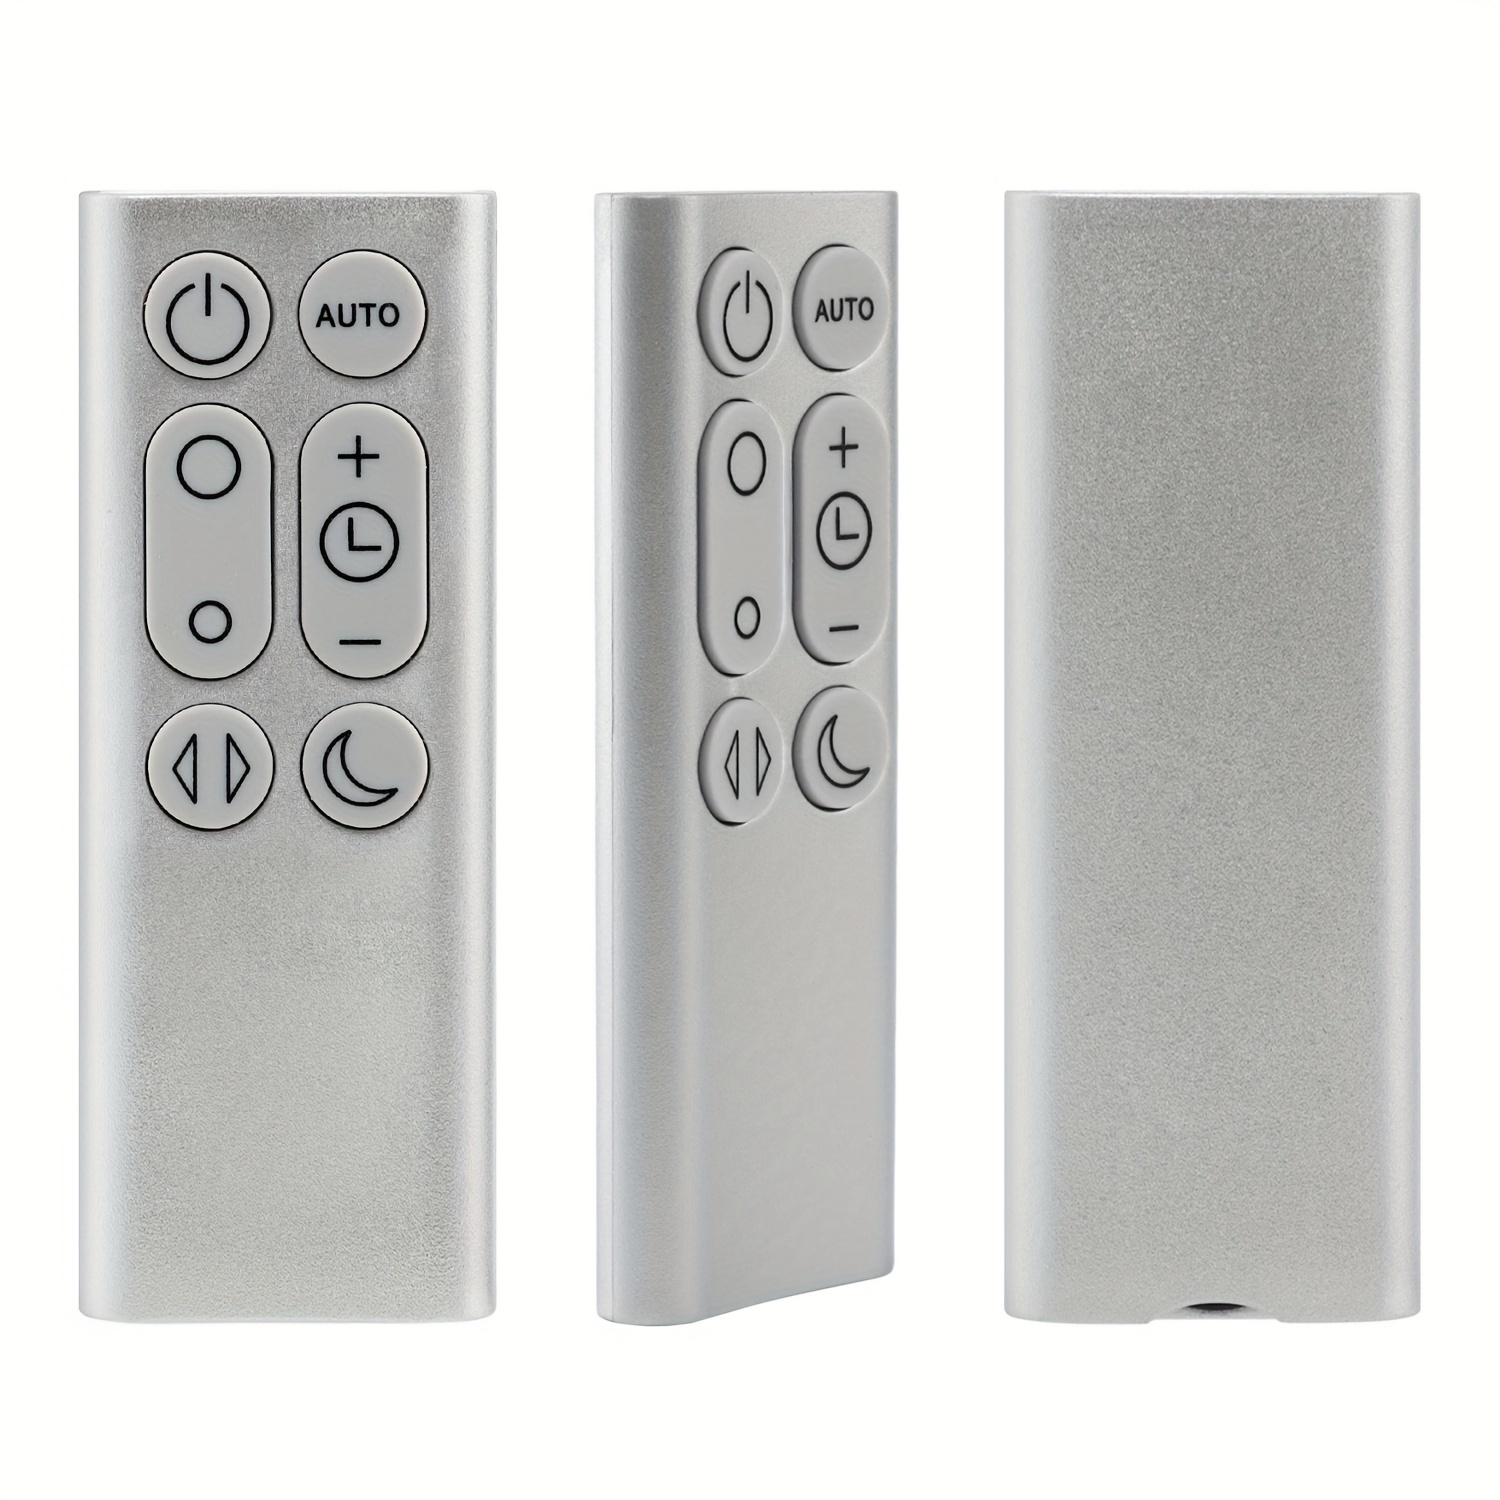 Upgrade Your Home With A New Remote Control For Dp01, Dp03, Tp02